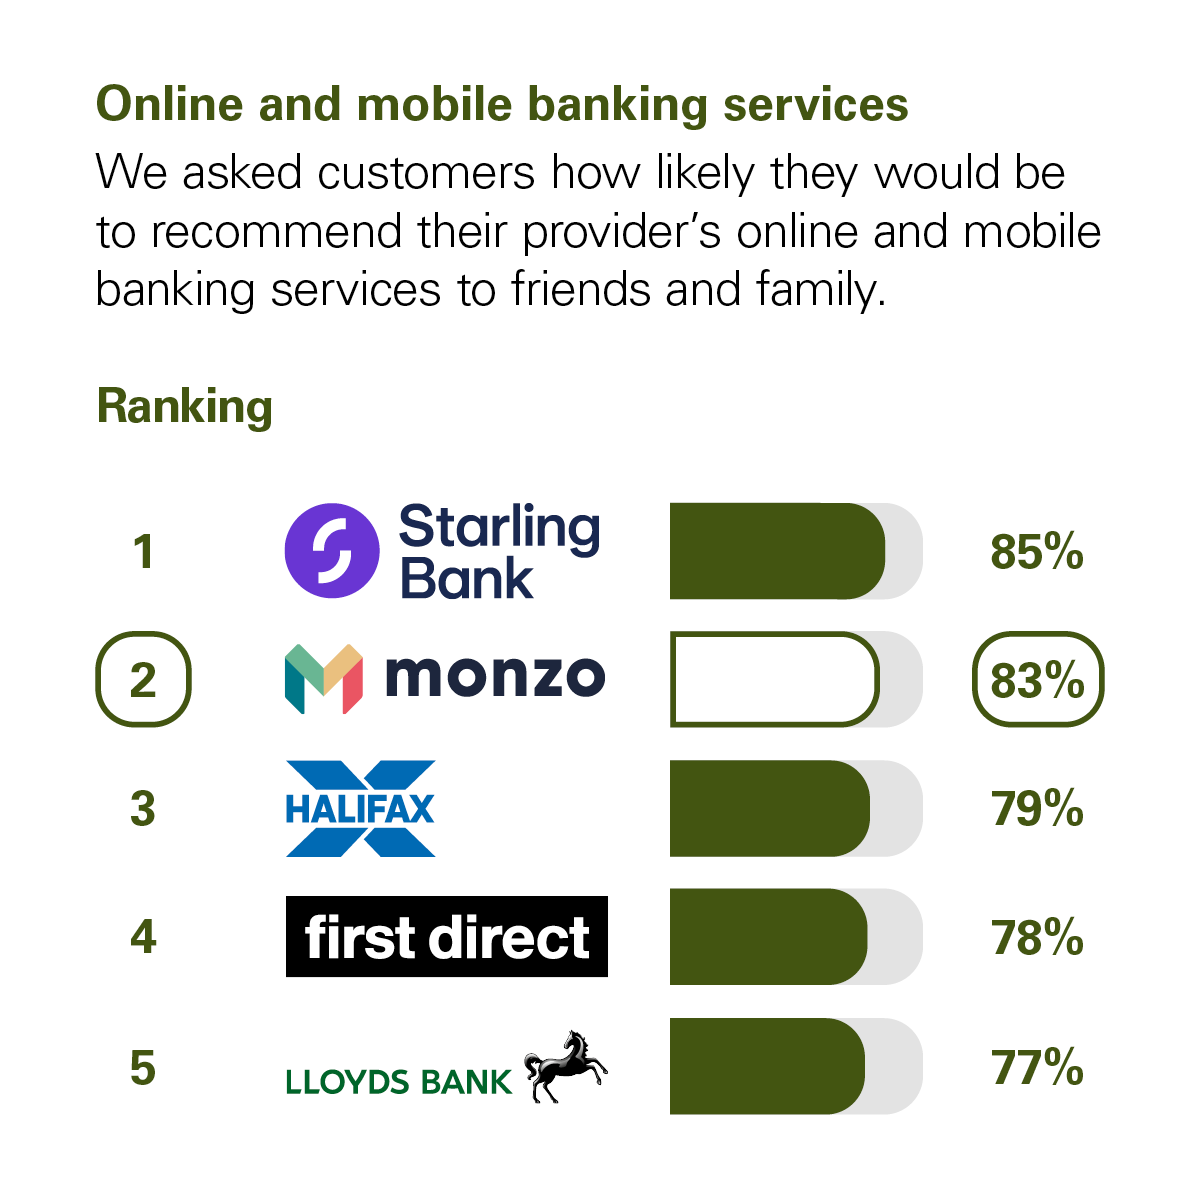 Graph showing the results of the CMA scoring of UK banks in the Online and Mobile Banking Services category. The CMA asked customers how likely they would be to recommend their provider's online and mobile banking services to friends and family. The rankings with percentage scores are: 1st Starling Bank with 85%. 2nd Monzo with 83%. 3rd Halifax with 79%. 4th First Direct with 78%. 5th Lloyds Bank with 77%.